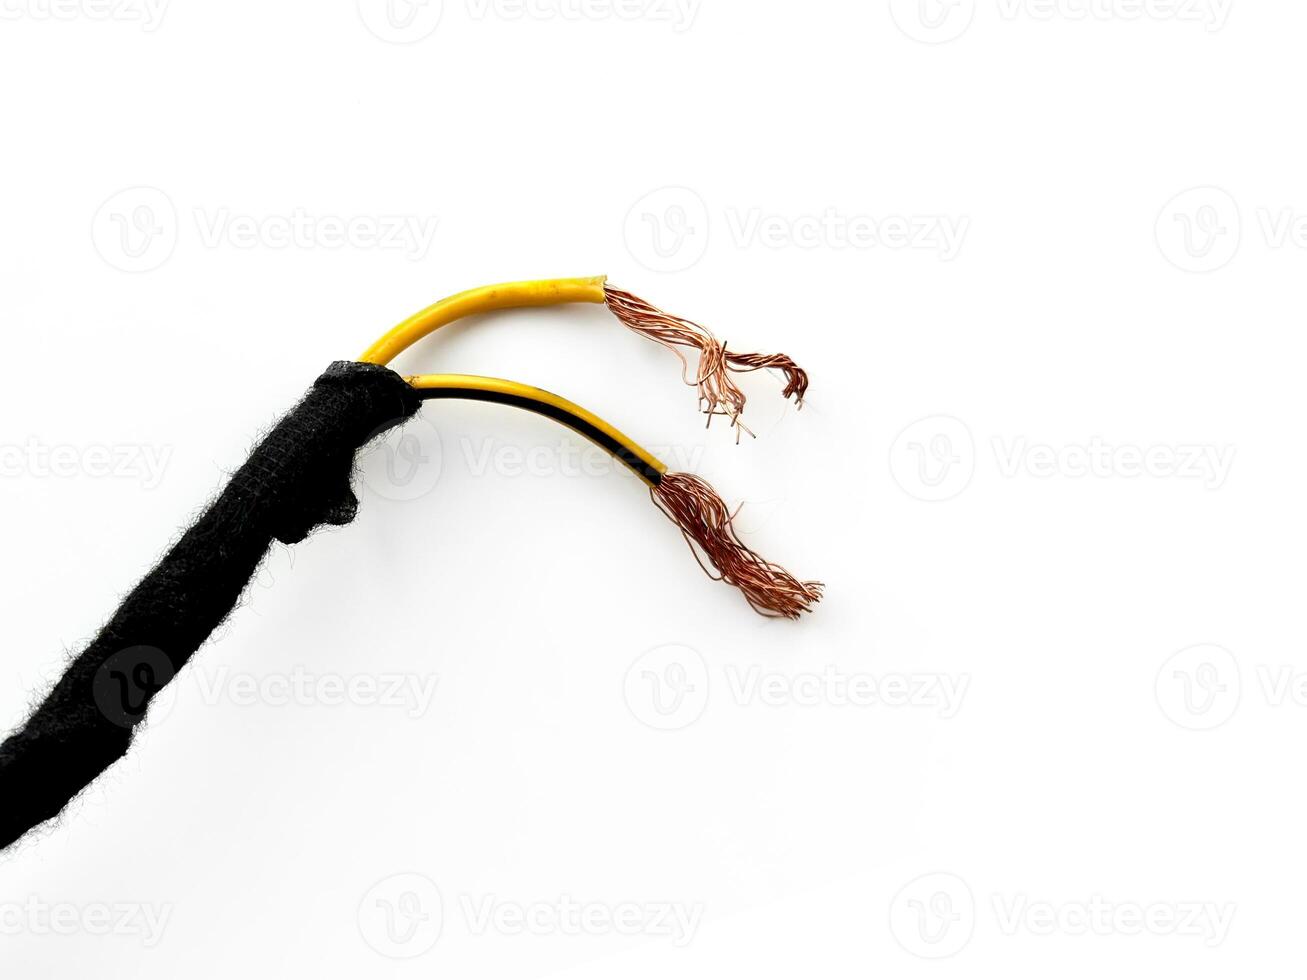 Cable Electrical power wire copper isolated on white background. Black electric cable installation photo